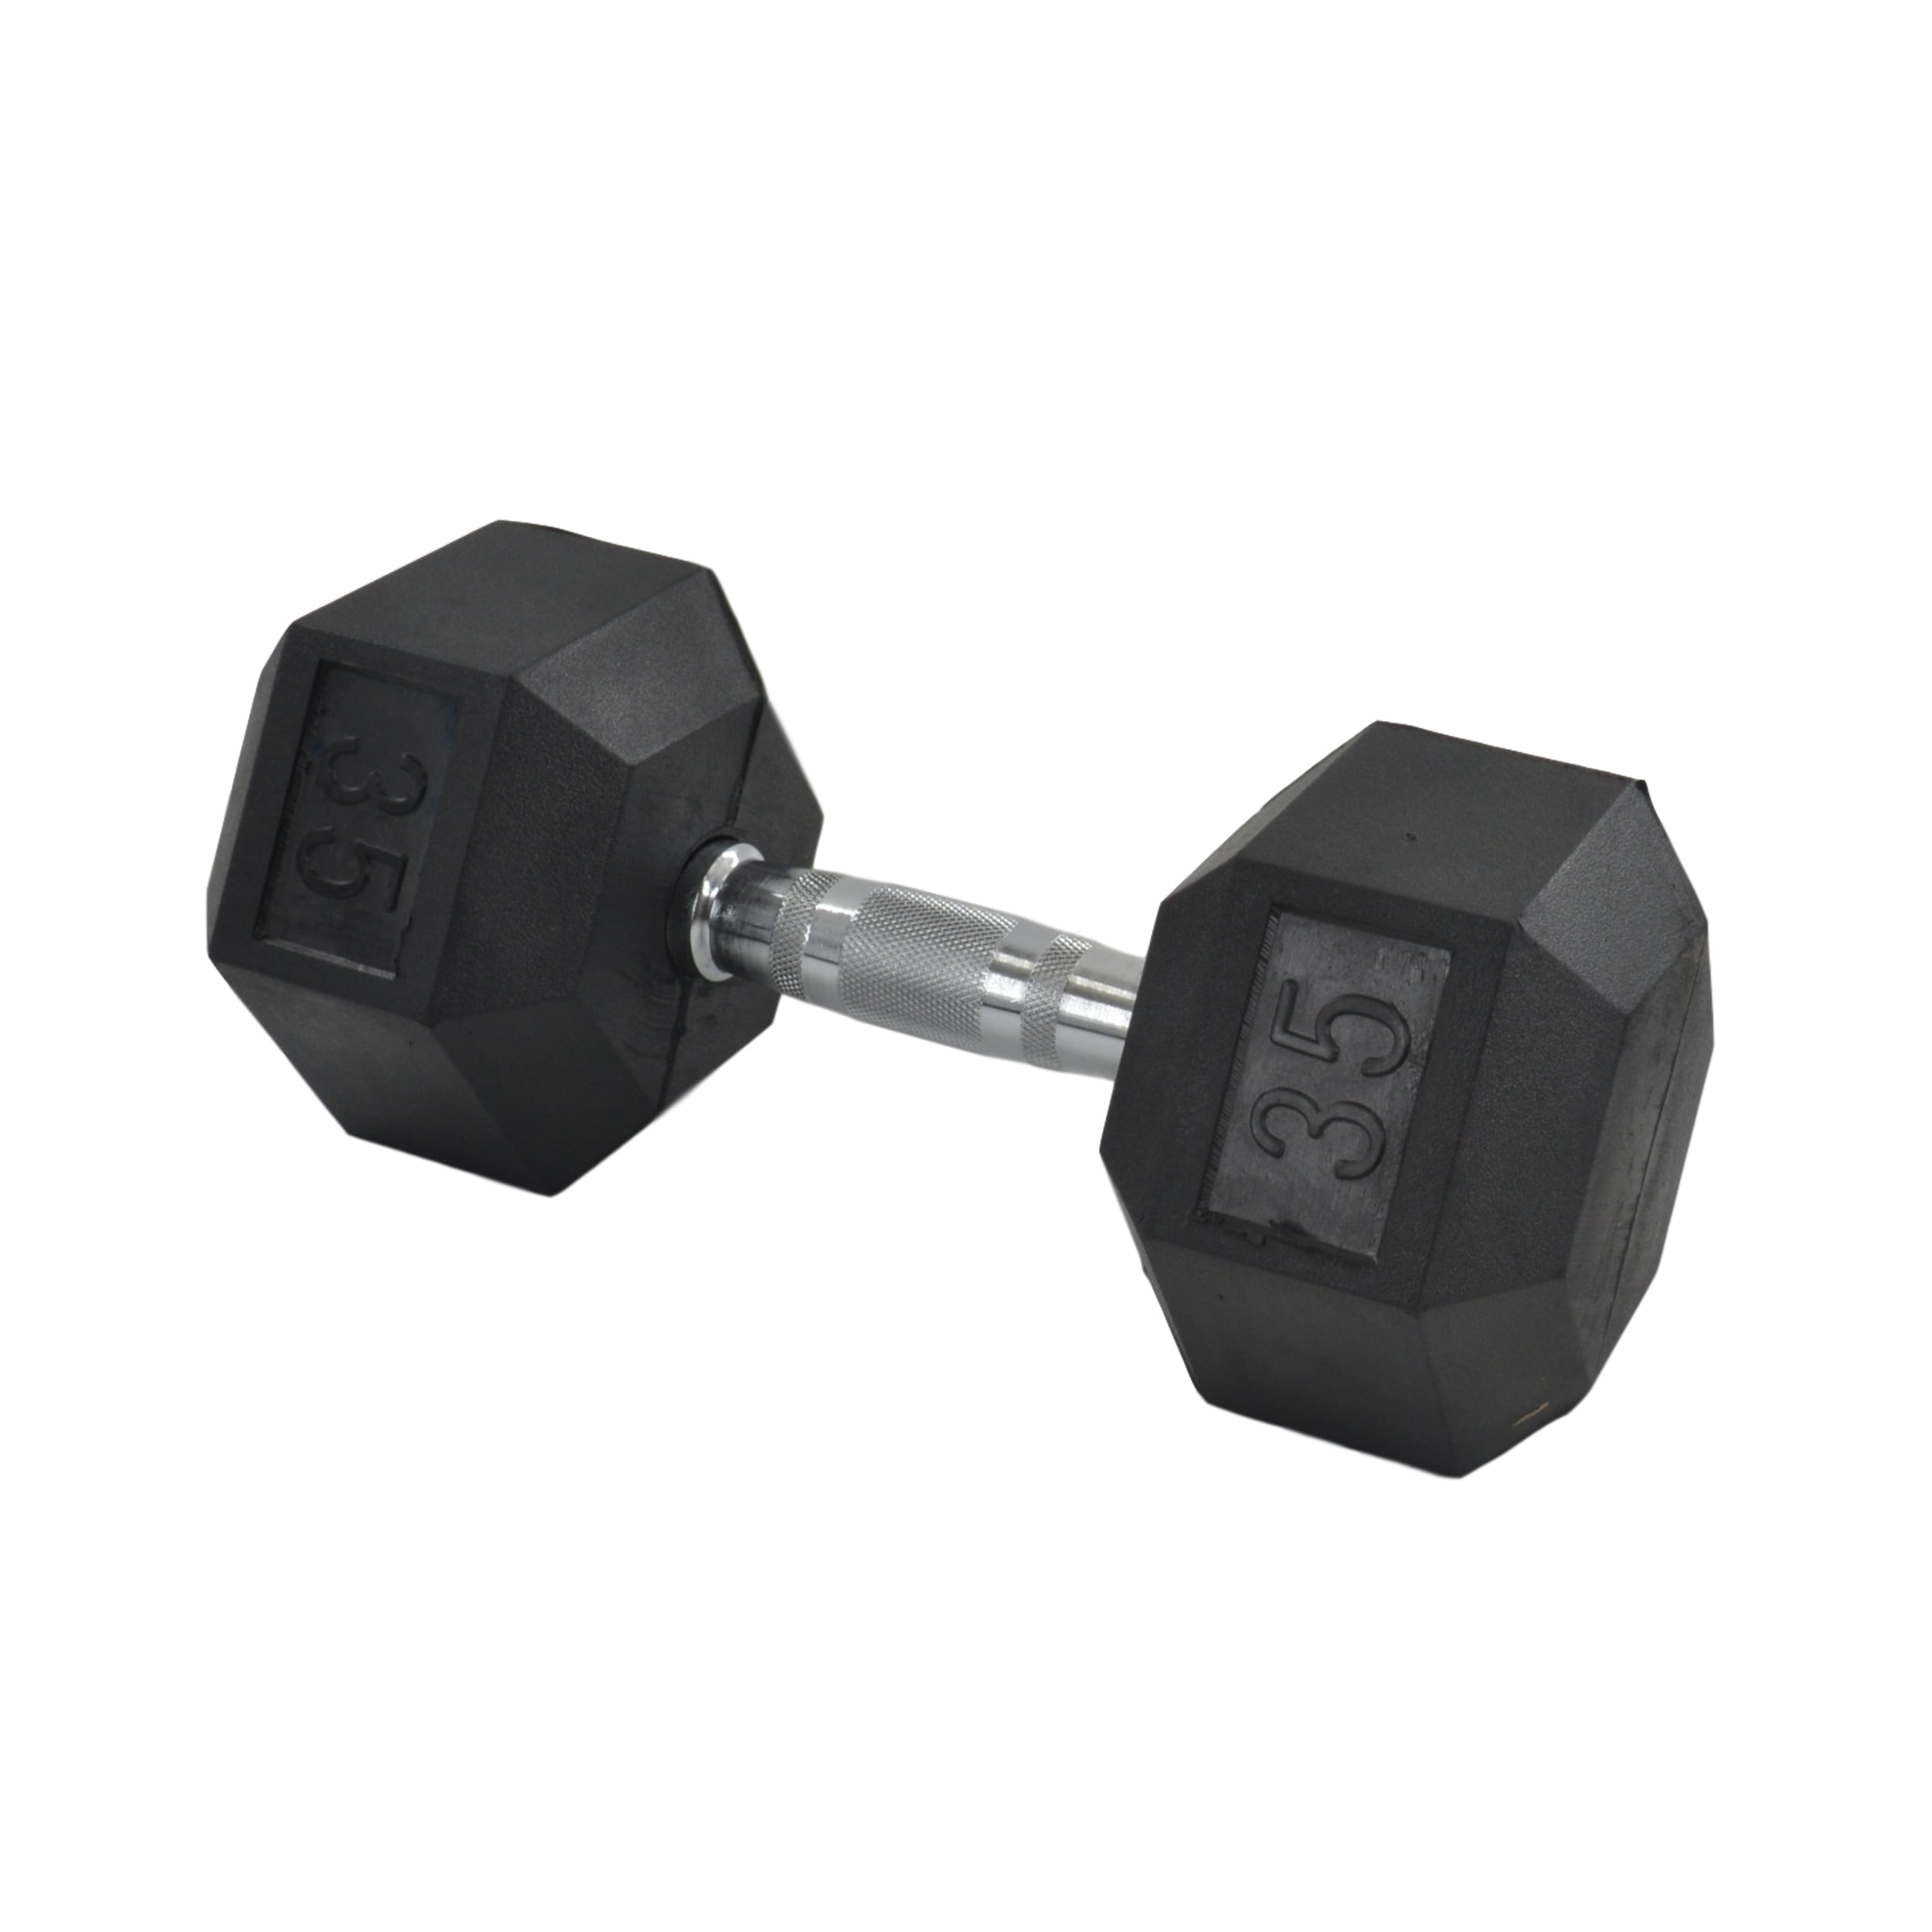 20 Weider or CAP Rubber Hex Dumbbells 5 or 50 lb Pairs Barbell LBS 40 10 30 